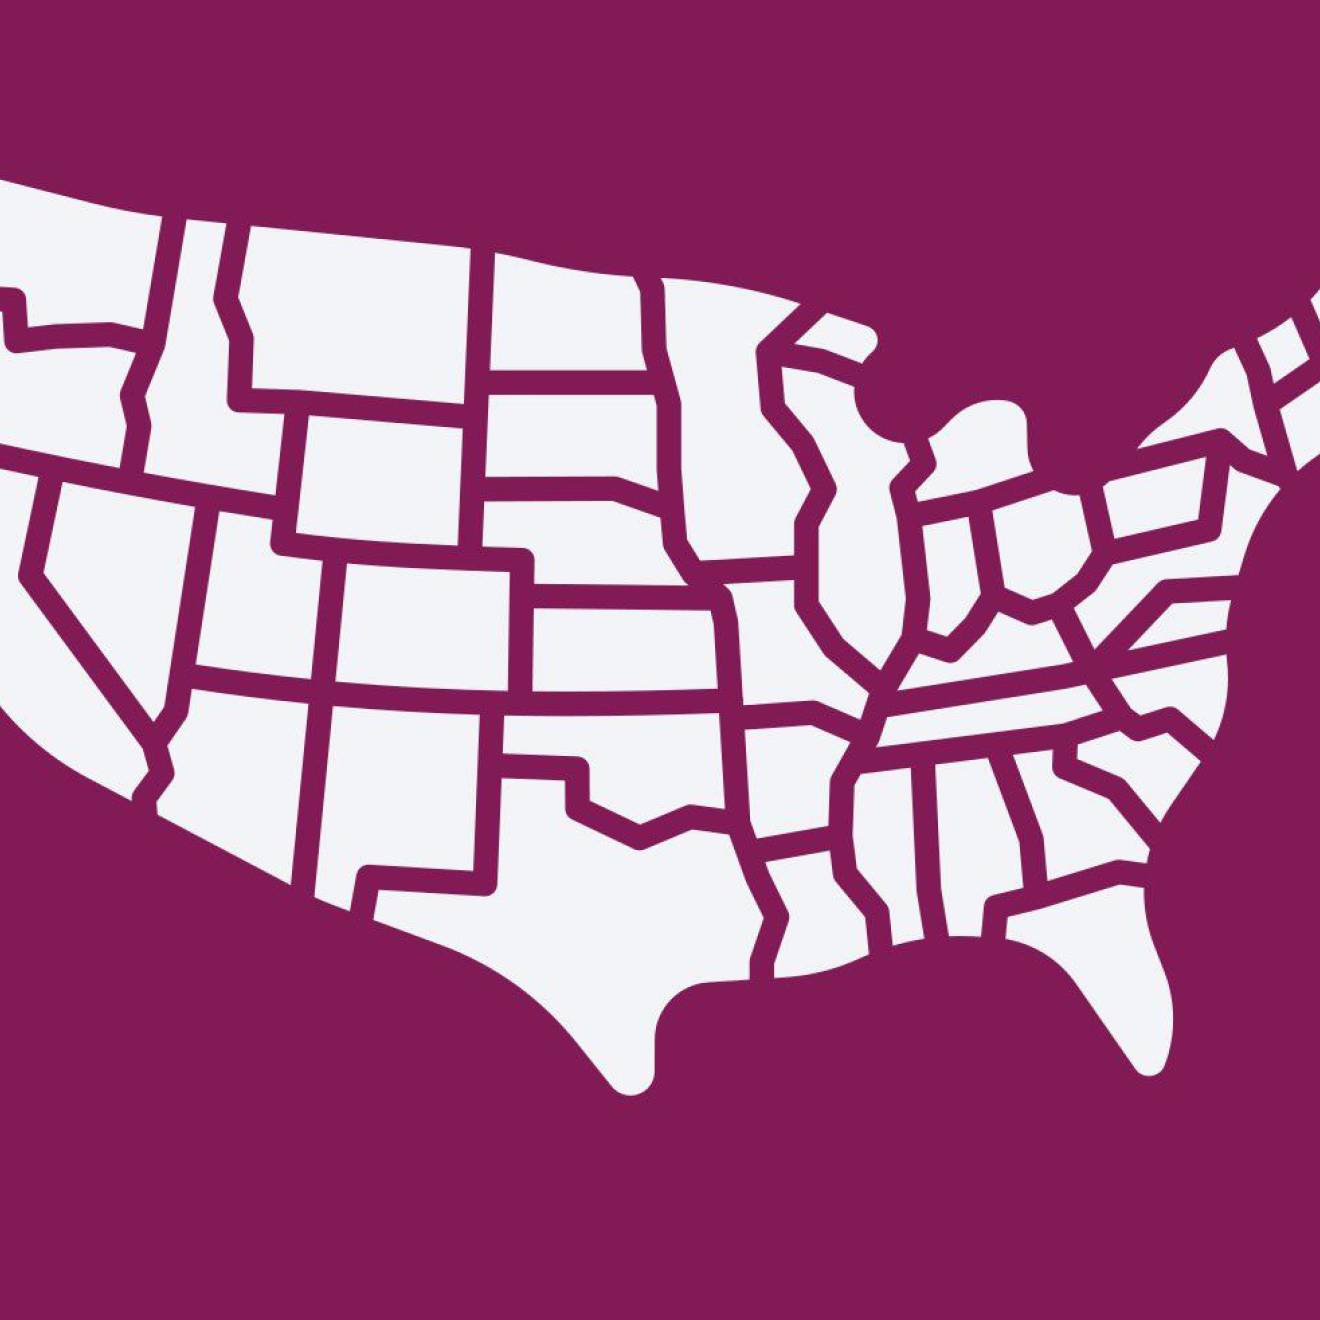 A map of the US on a magenta background